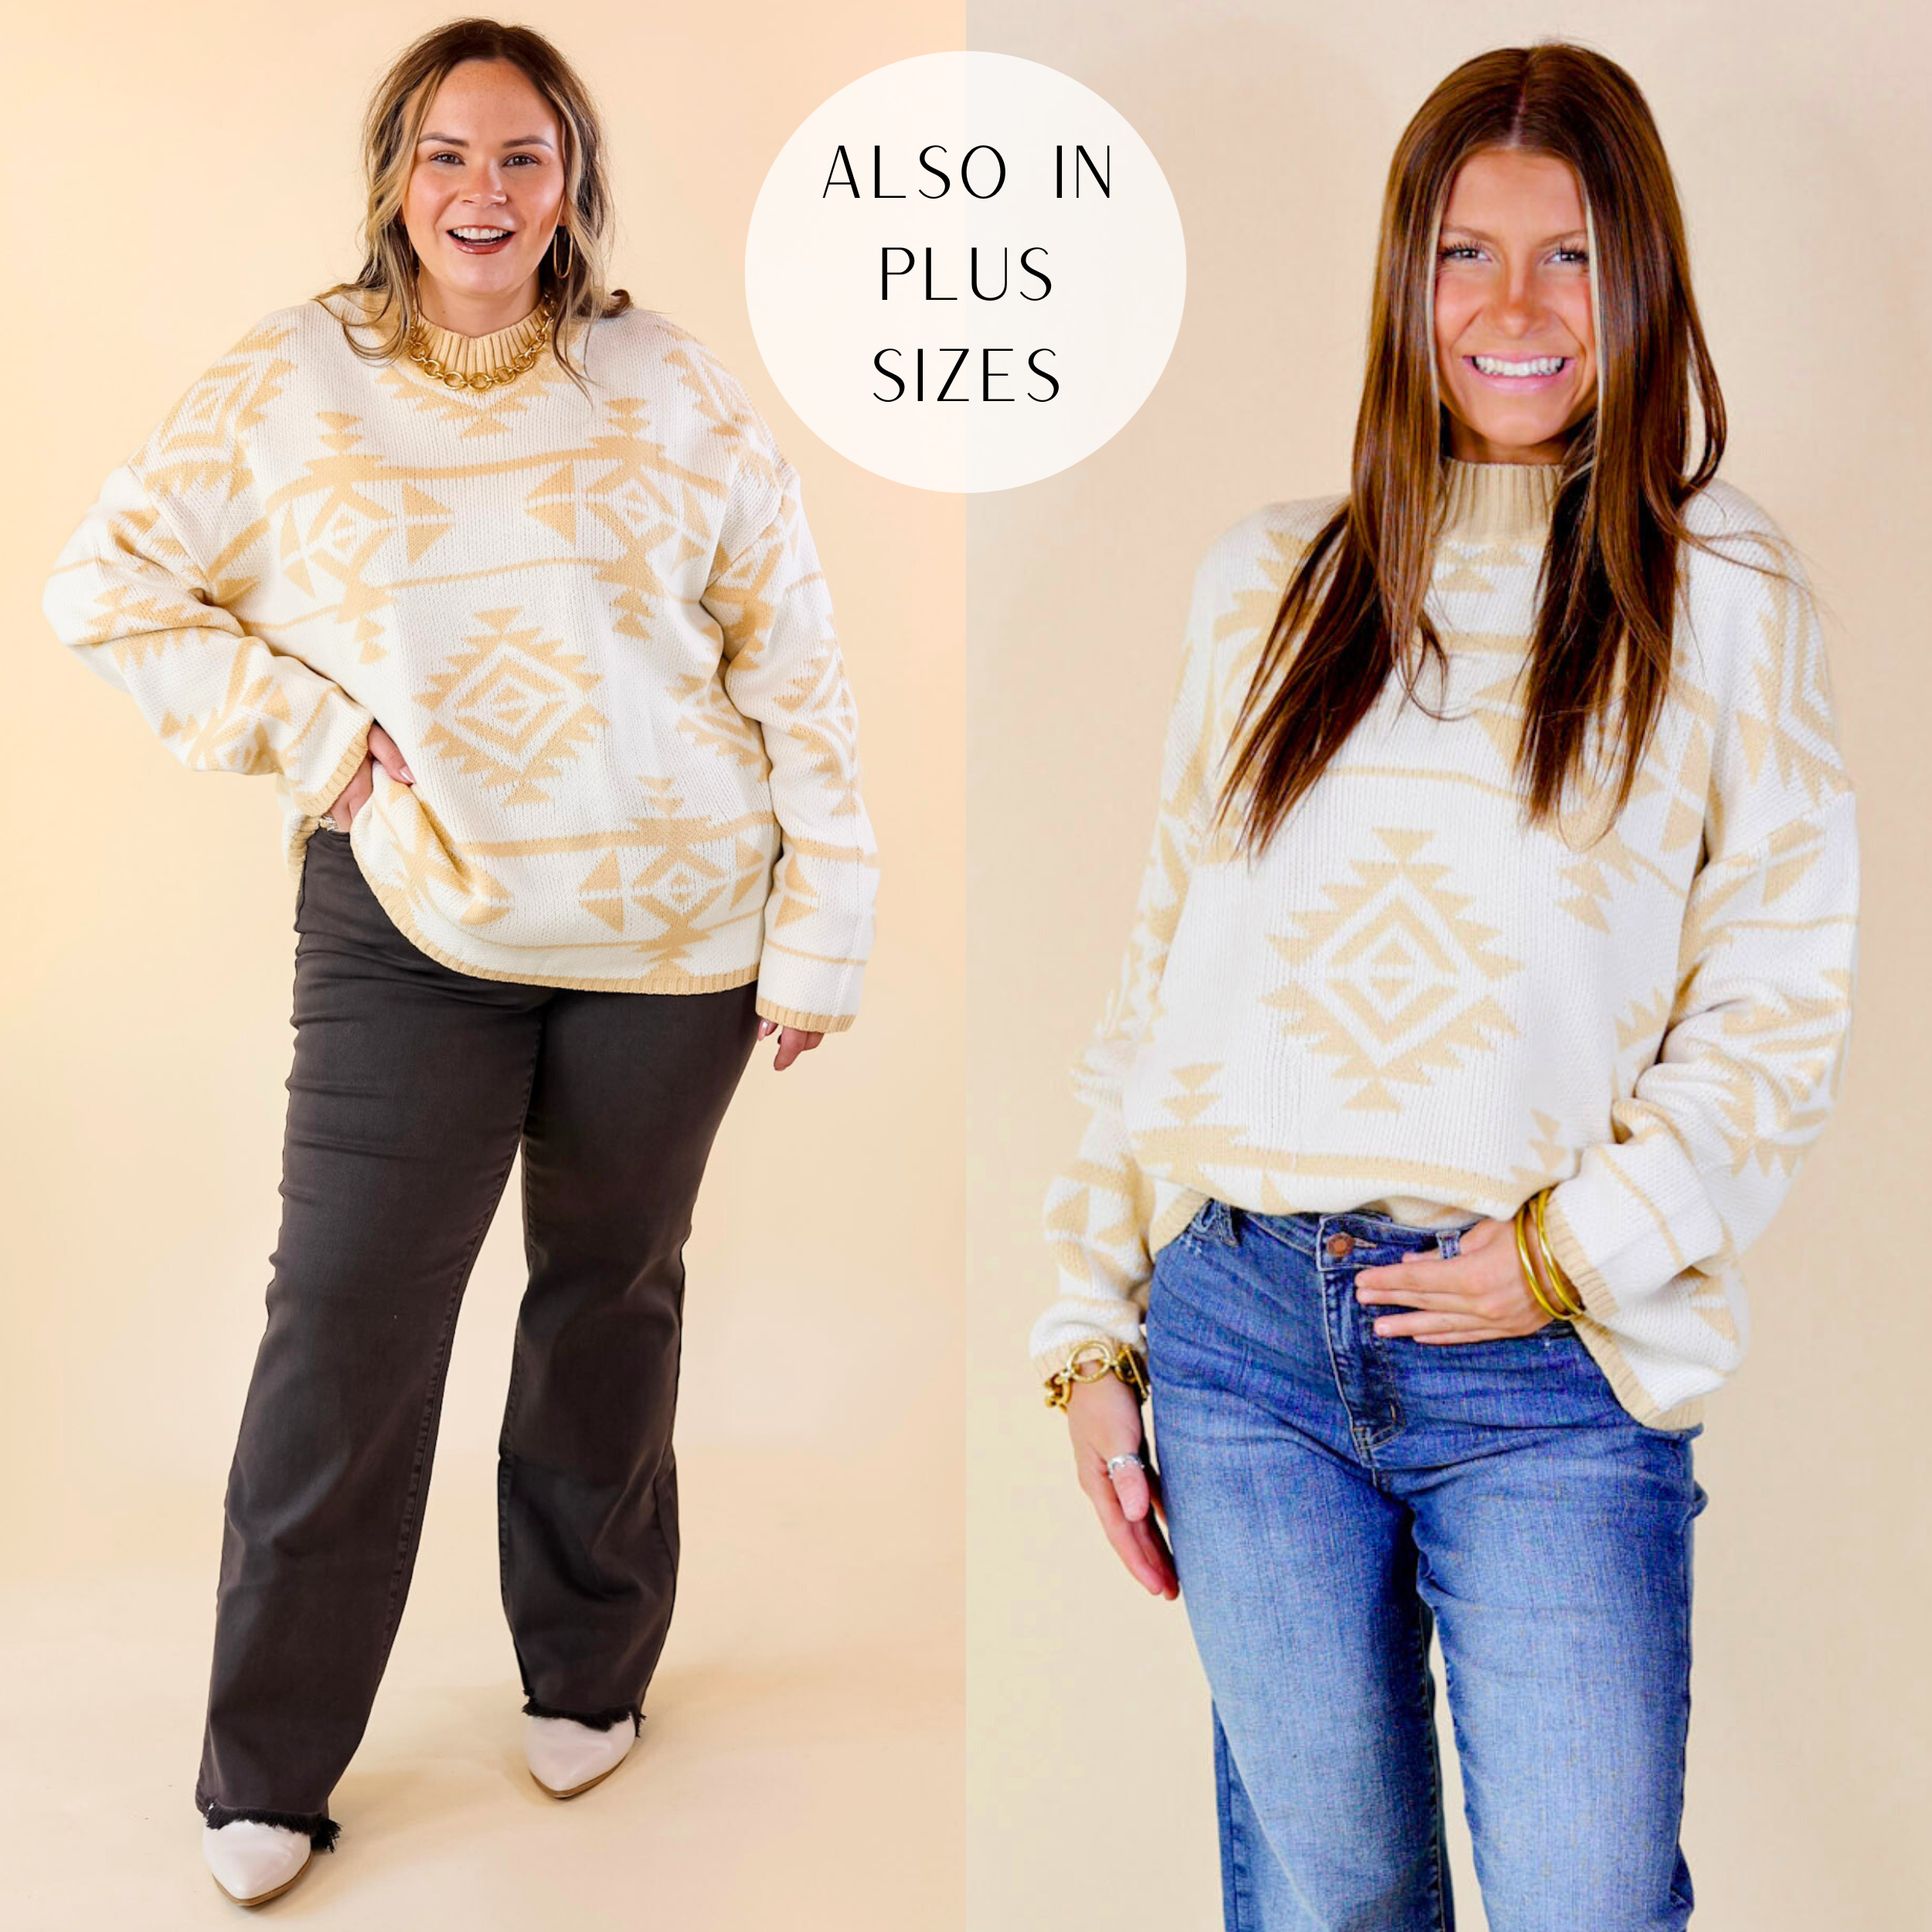 Model is wearing an aztec print sweater in ivory and beige. Size large model has it paired with brown jeans, ivory booties, and gold jewelry. Size small model has it paired with denim jeans and gold jewelry.